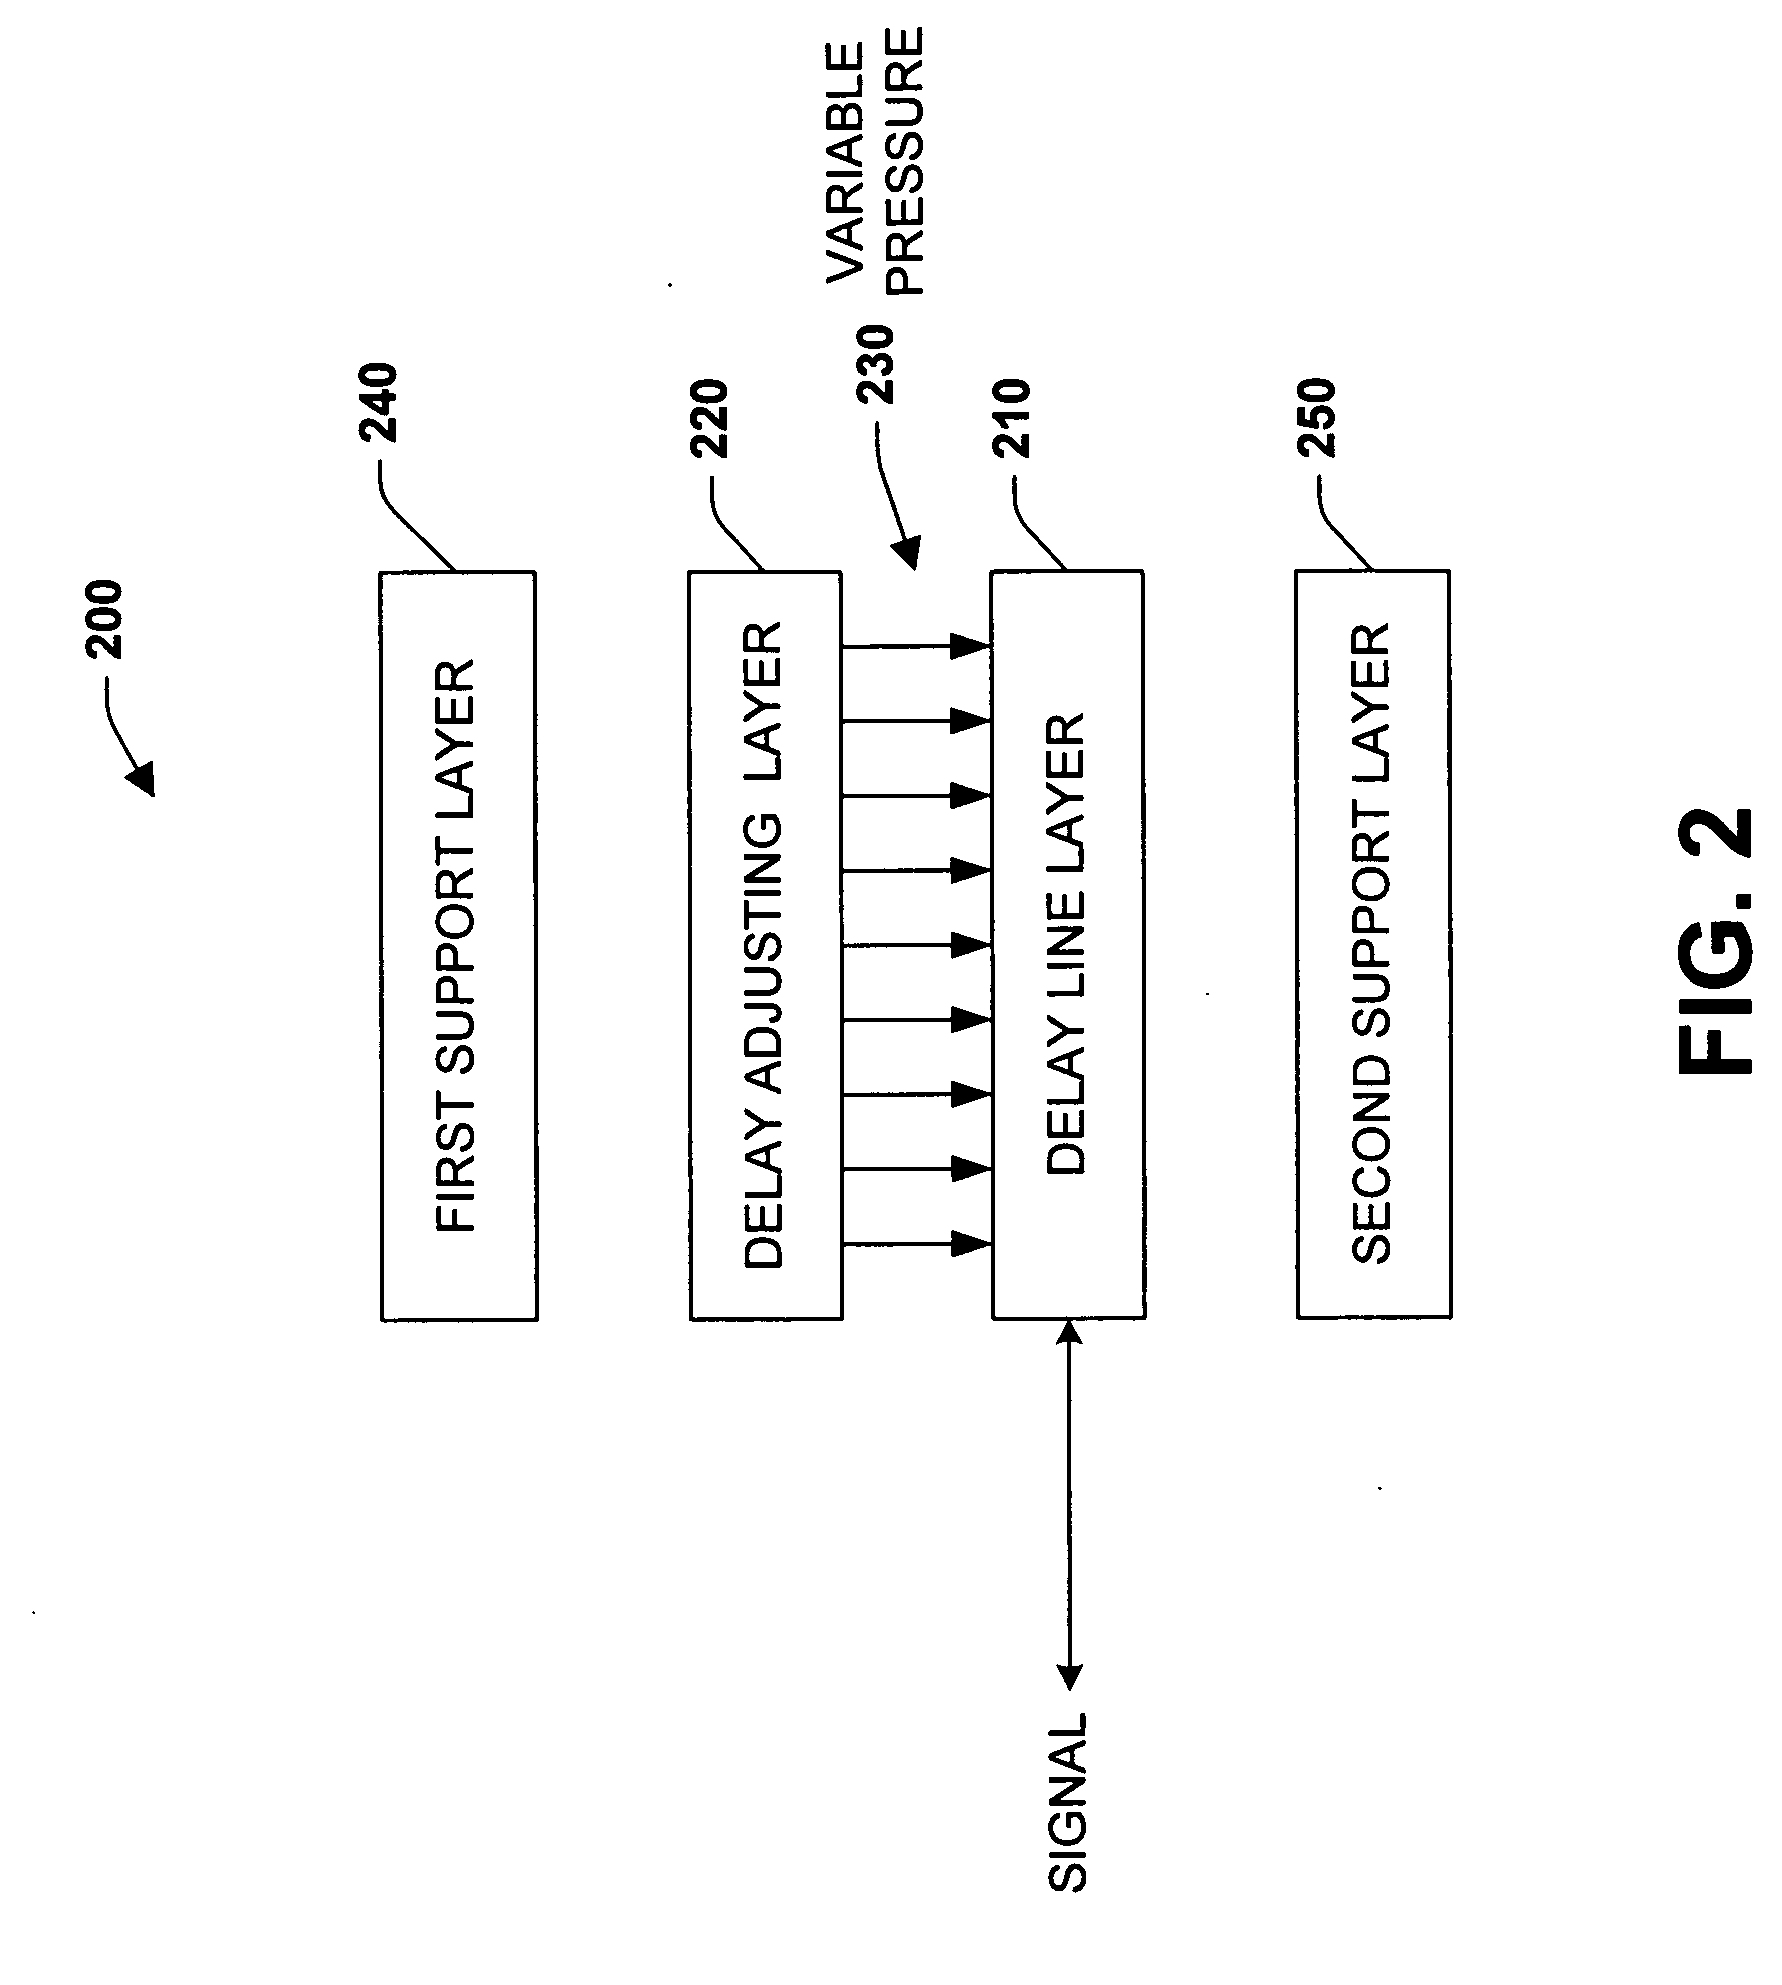 Systems and methods for a continuously variable optical delay line